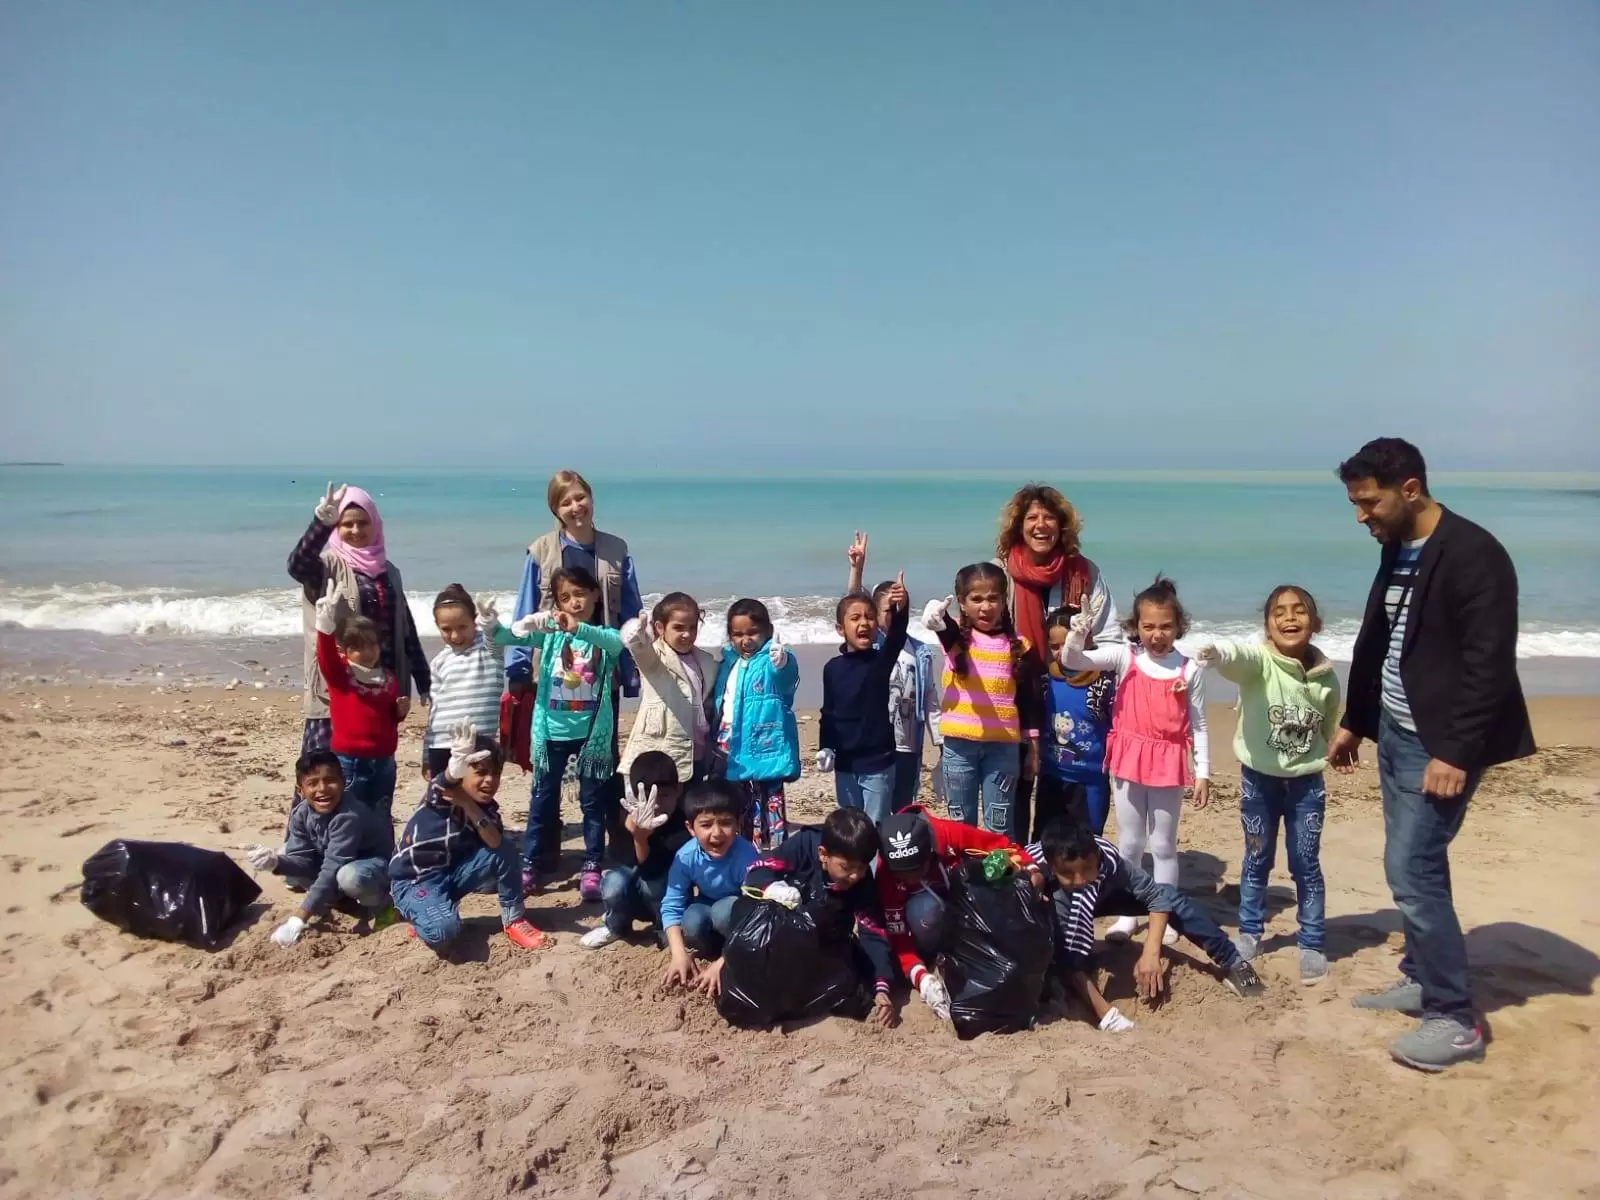 Refugees in Brussels and Lebanon take the #TrashTag Challenge